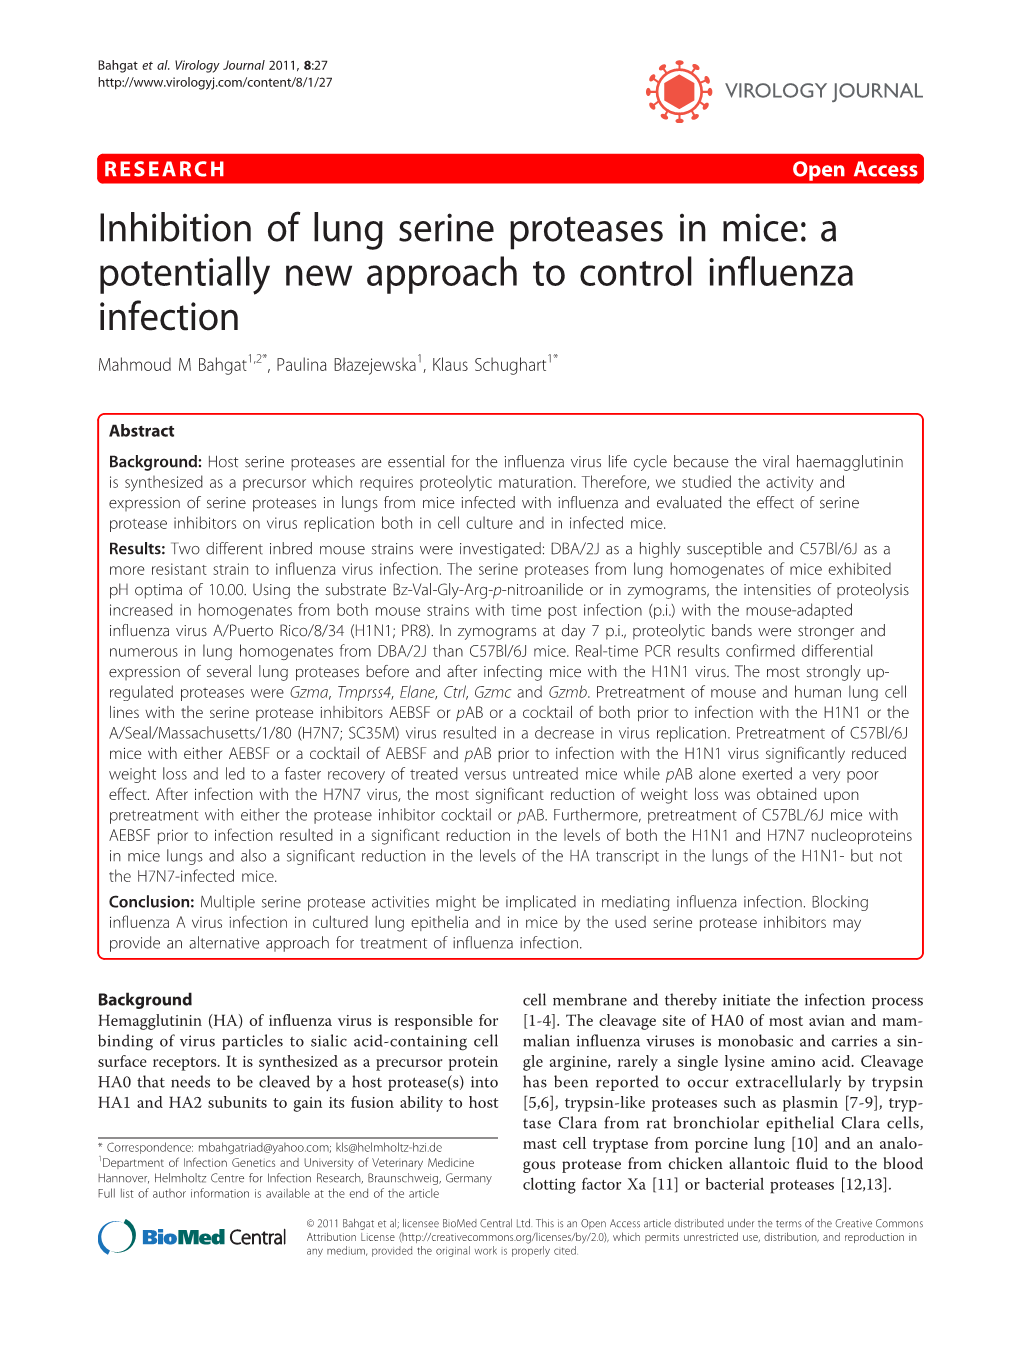 Inhibition of Lung Serine Proteases in Mice: a Potentially New Approach to Control Influenza Infection Mahmoud M Bahgat1,2*, Paulina Błazejewska1, Klaus Schughart1*